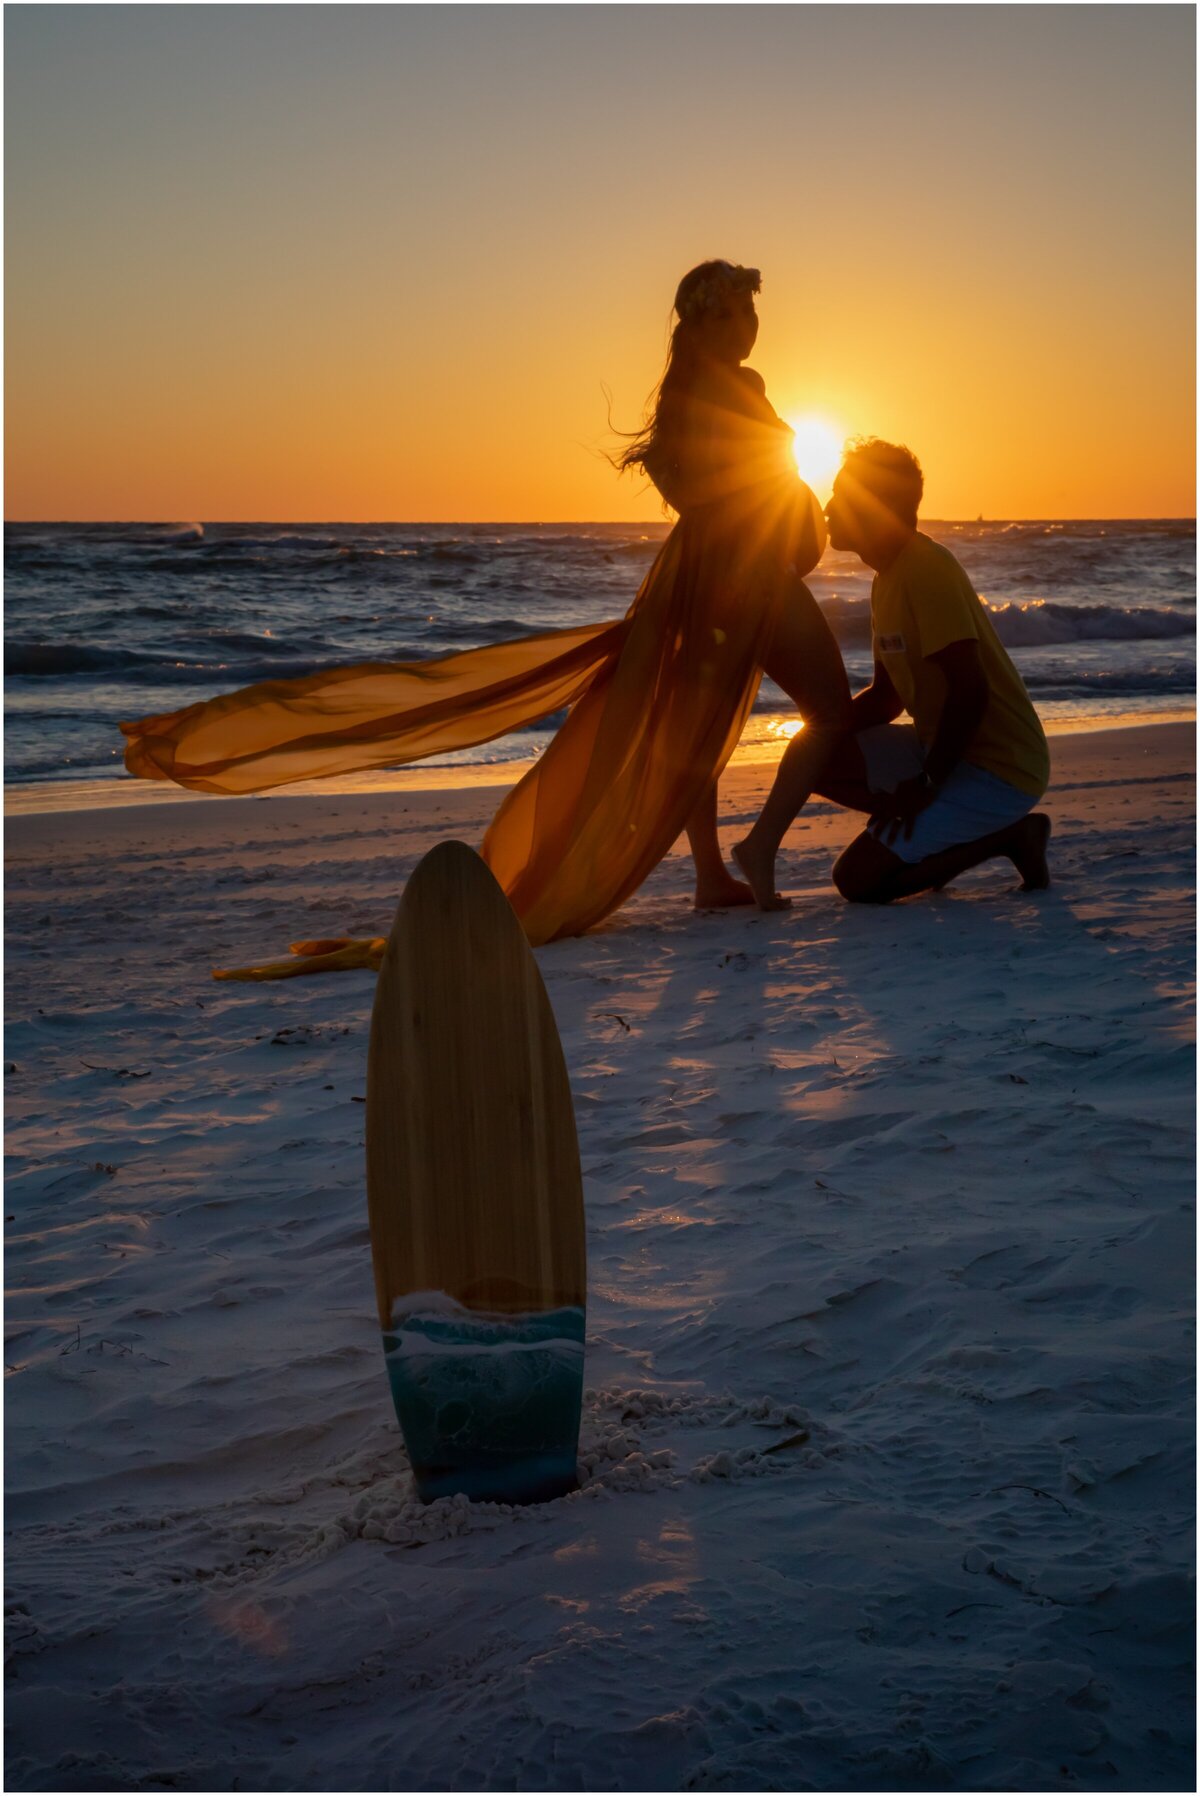 A silhouette against the sunset background of a pregnant women with husband kissing the belly